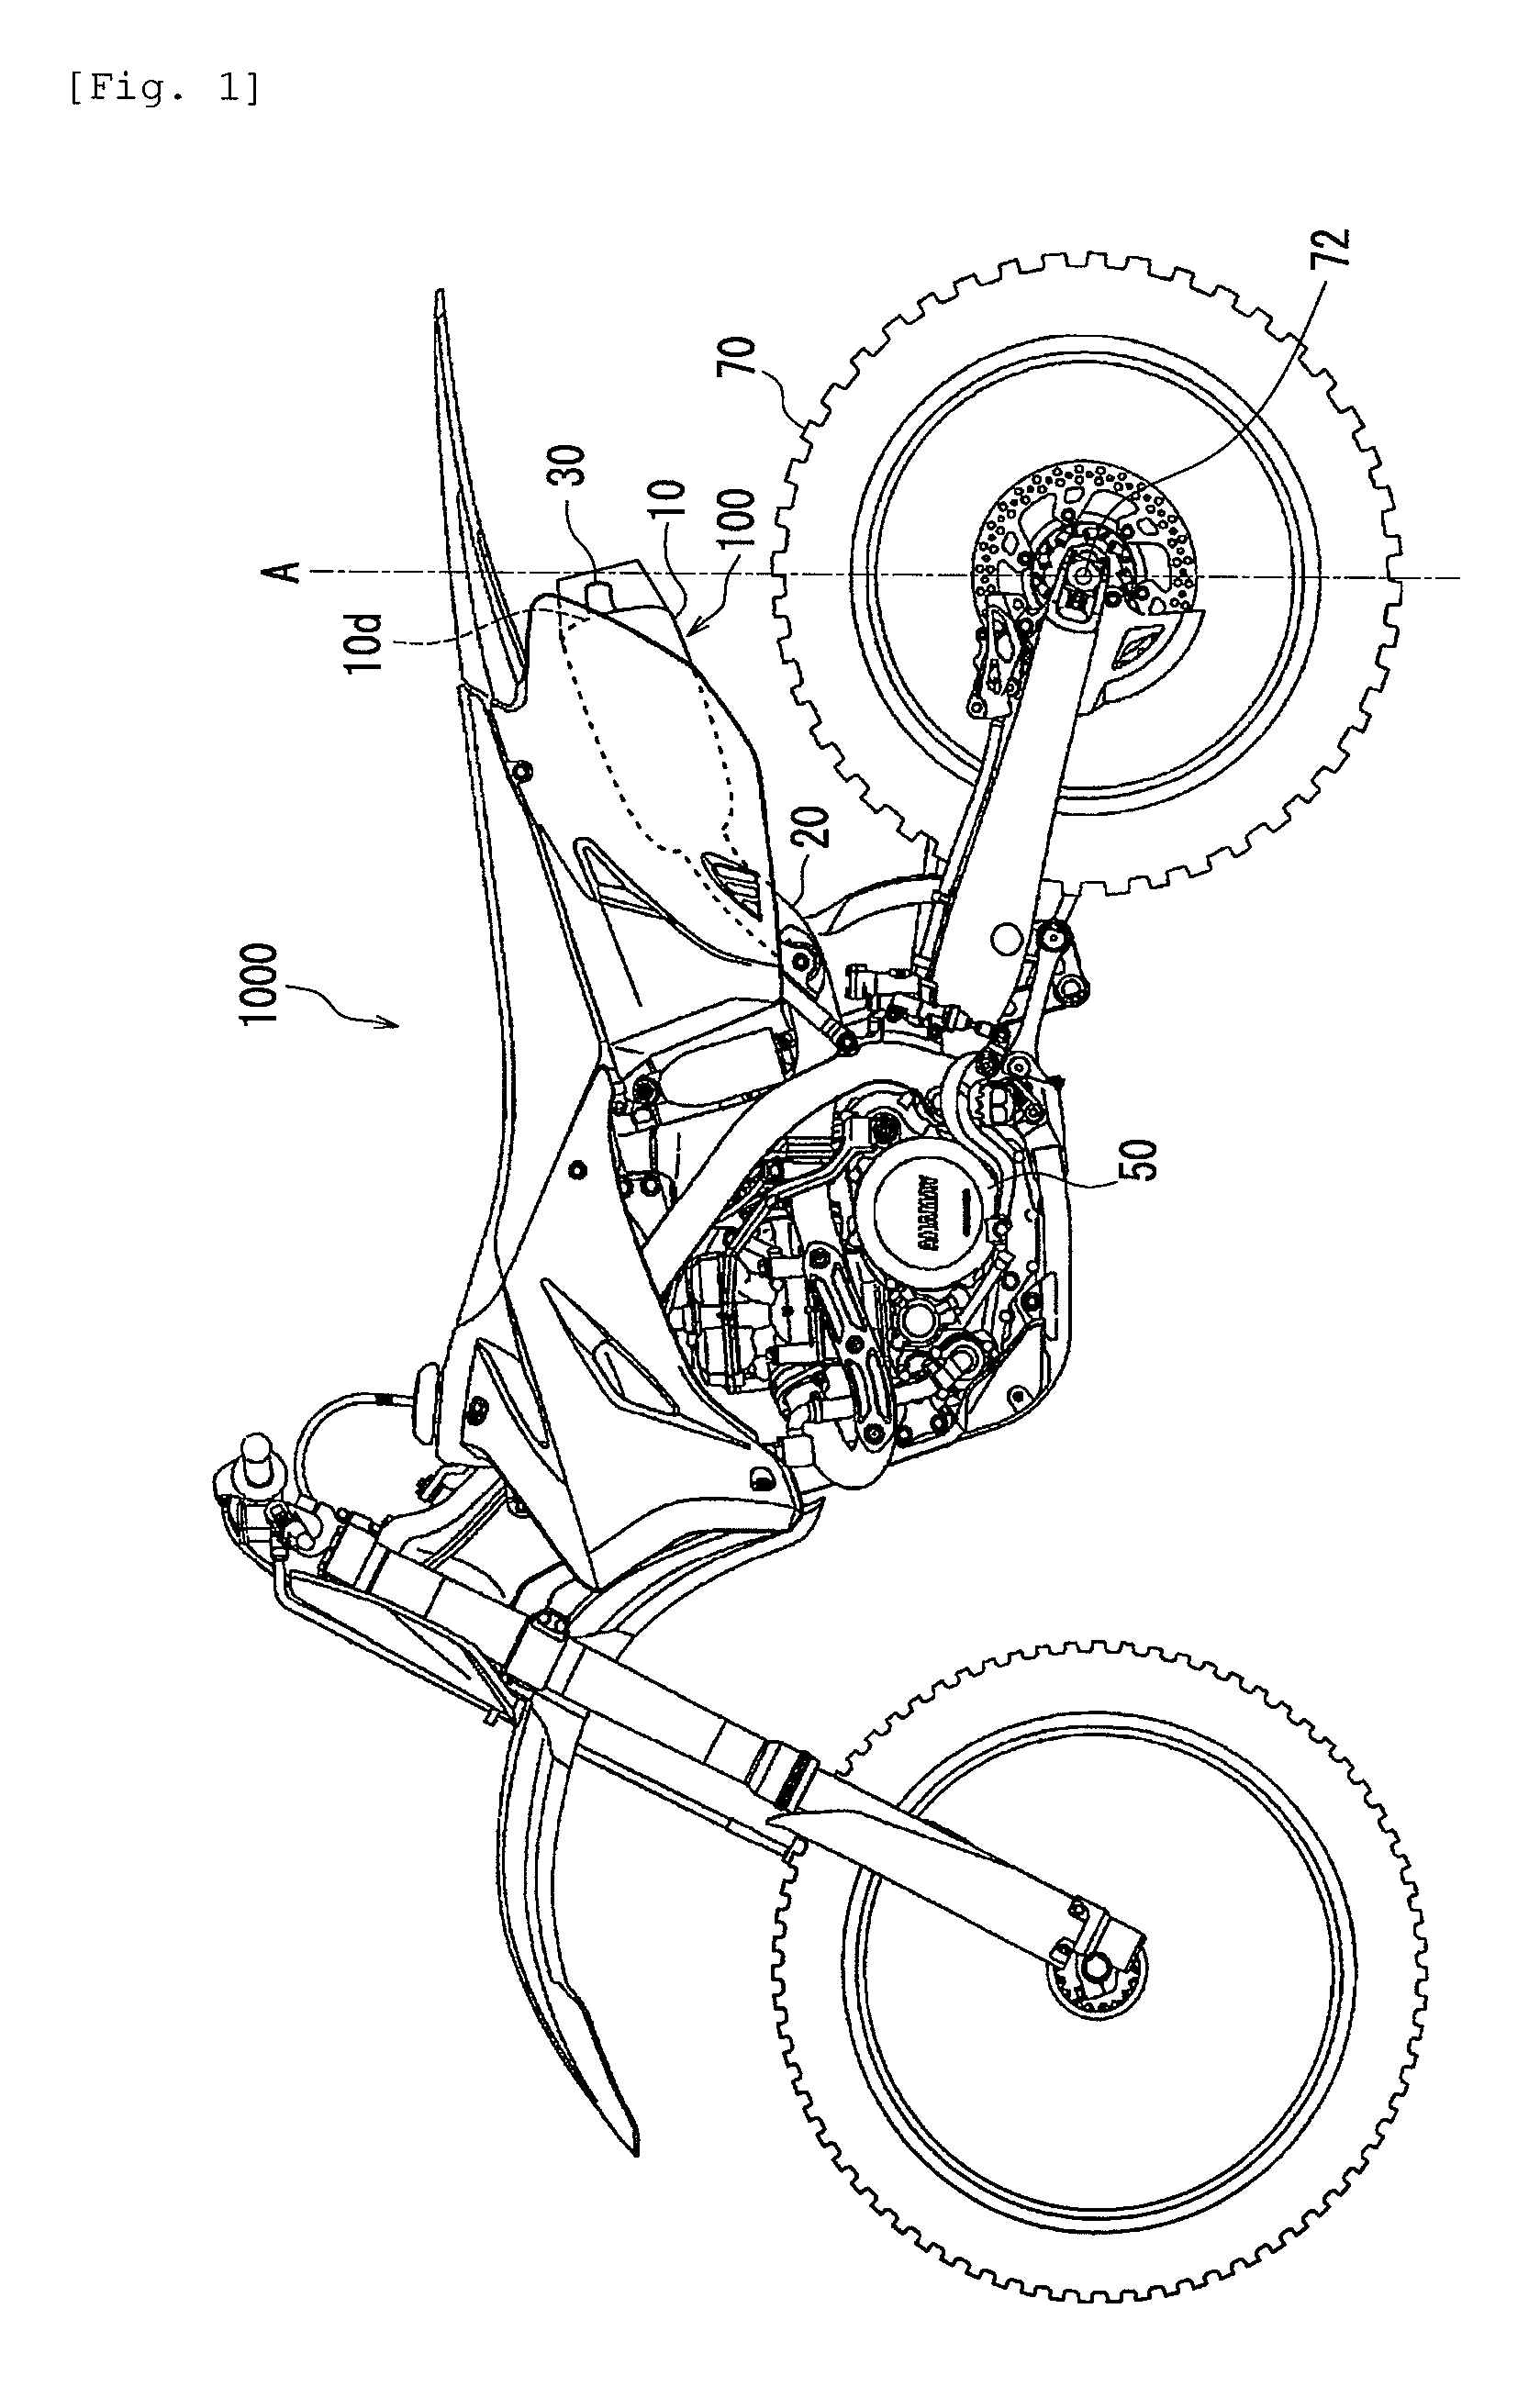 Vehicle exhaust system